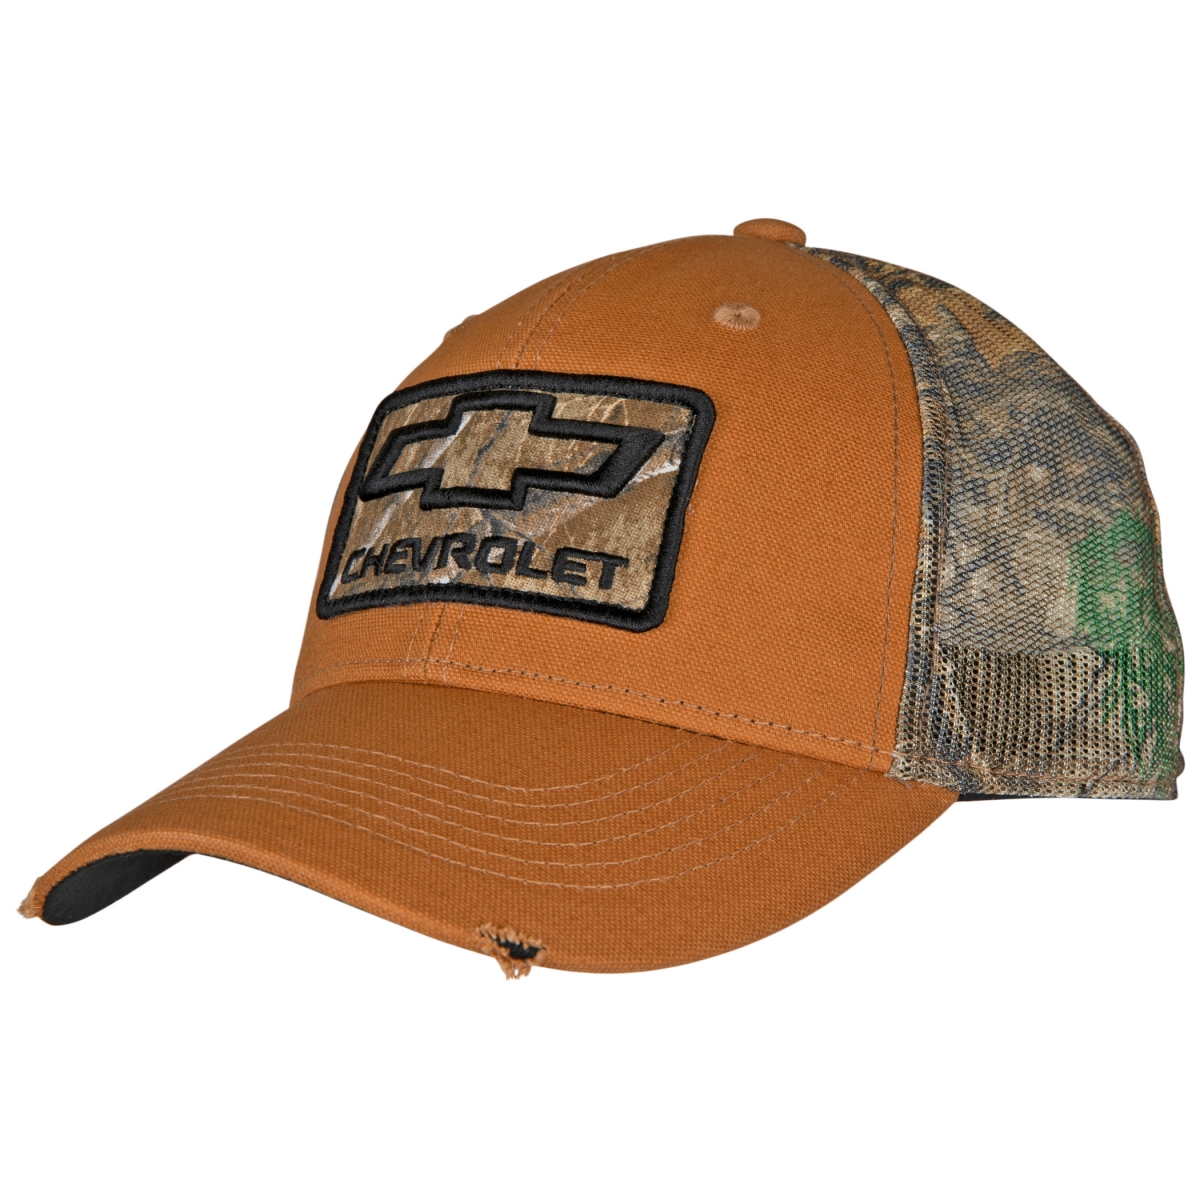 Picture of Chevy 847103 Chevrolet Logo Worn Camo Pre-Curved Adjustable Trucker Hat